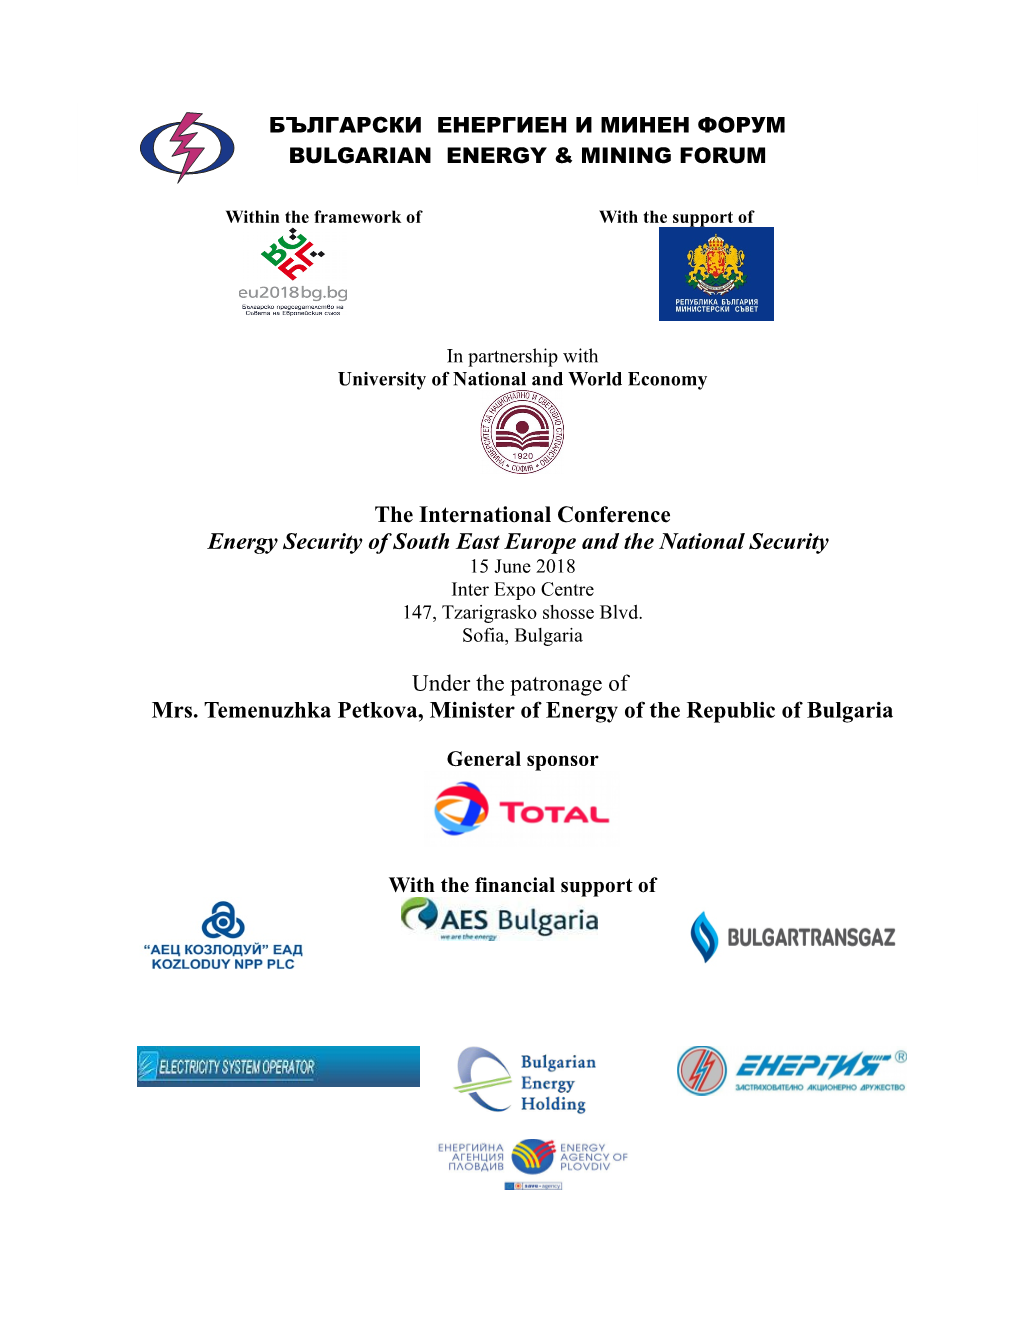 The International Conference Energy Security of South East Europe and the National Security 15 June 2018 Inter Expo Centre 147, Tzarigrasko Shosse Blvd